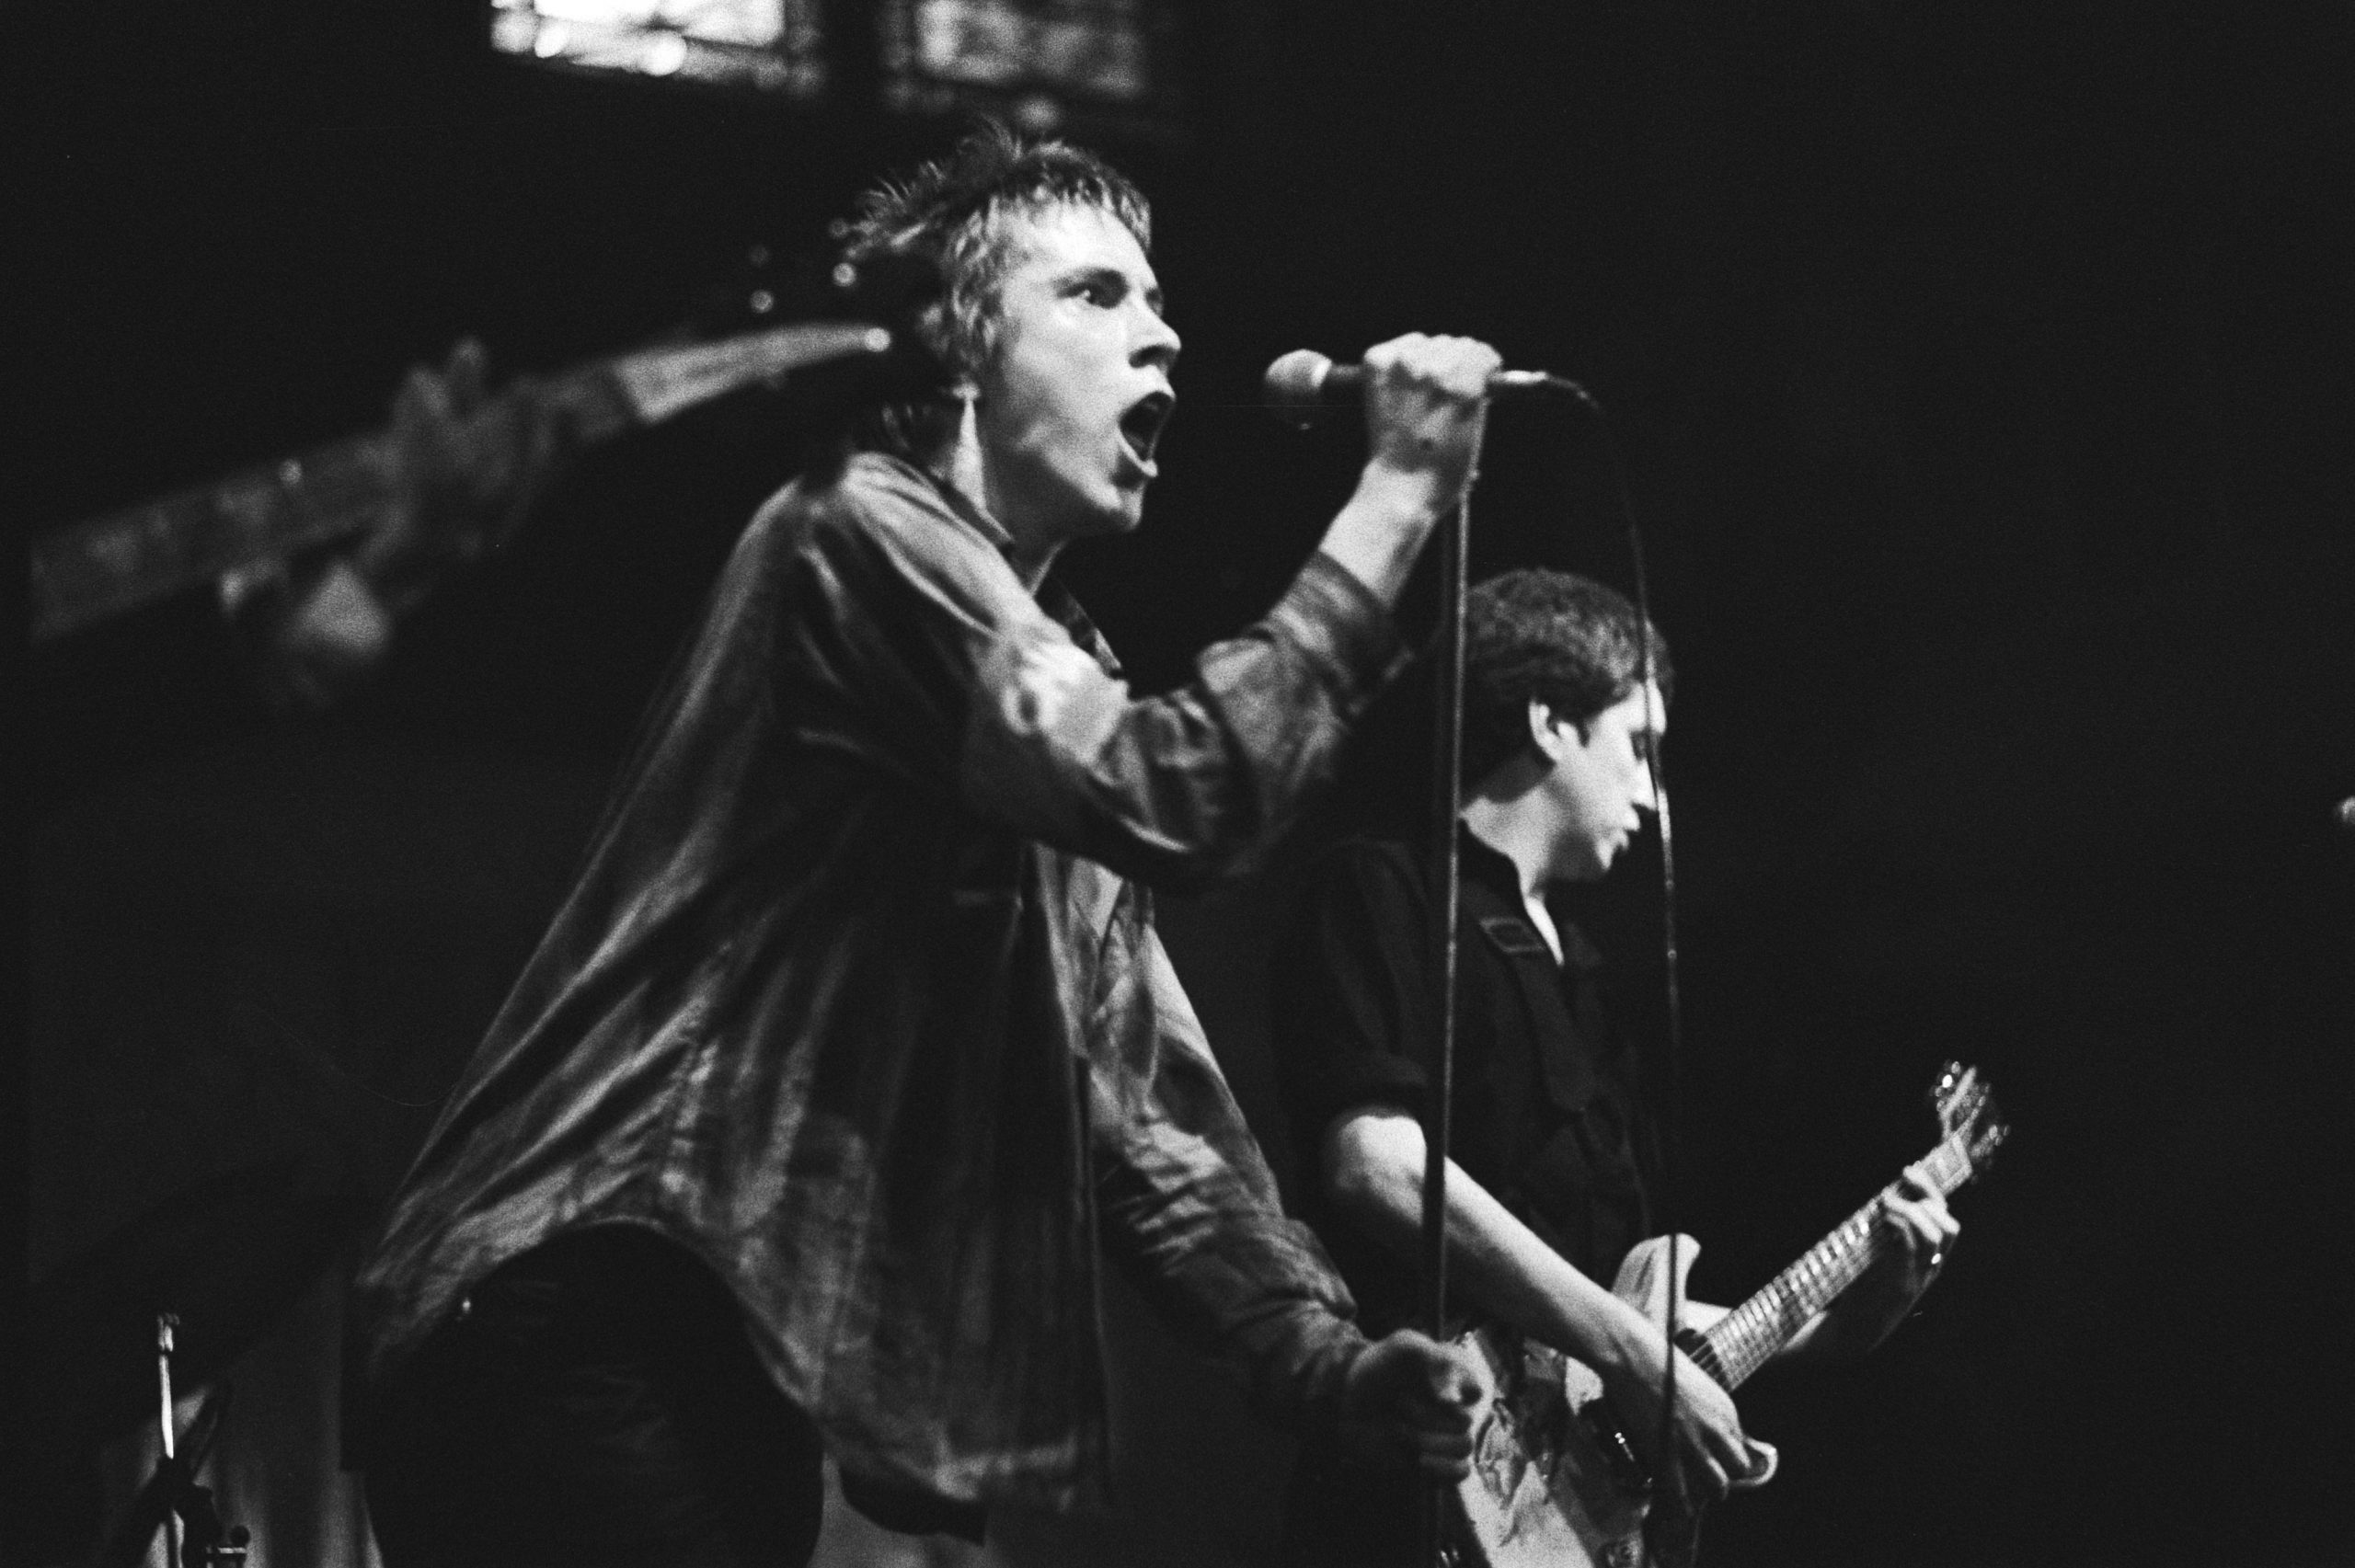 Black and white photo of the lead singer of The Sex Pistols performing live